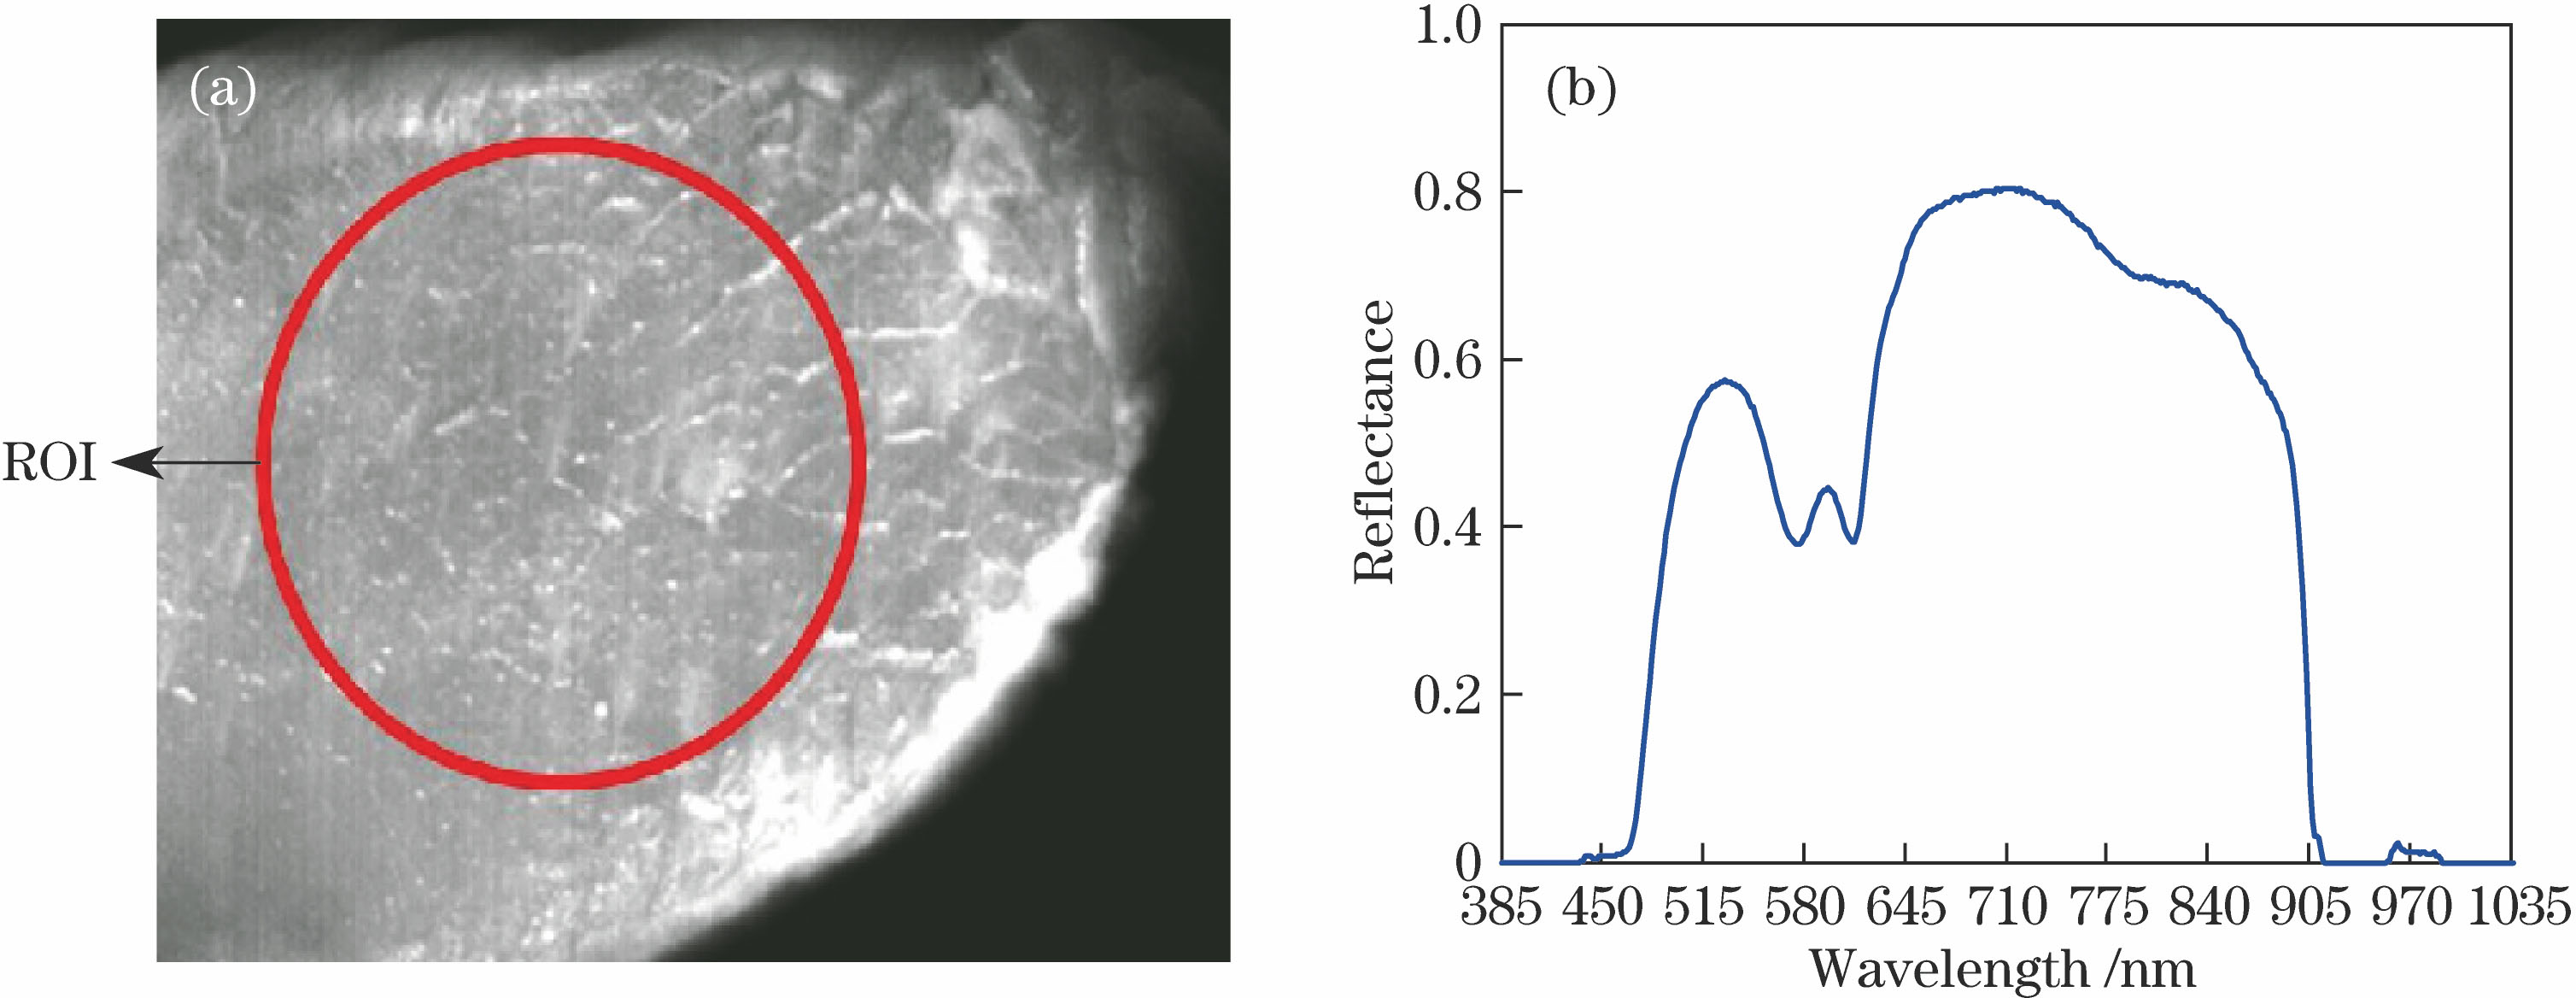 (a) Hyperspectral image at wavelength of 280 nm of ROI and (b) reflectance curve after calibration of a certain sample